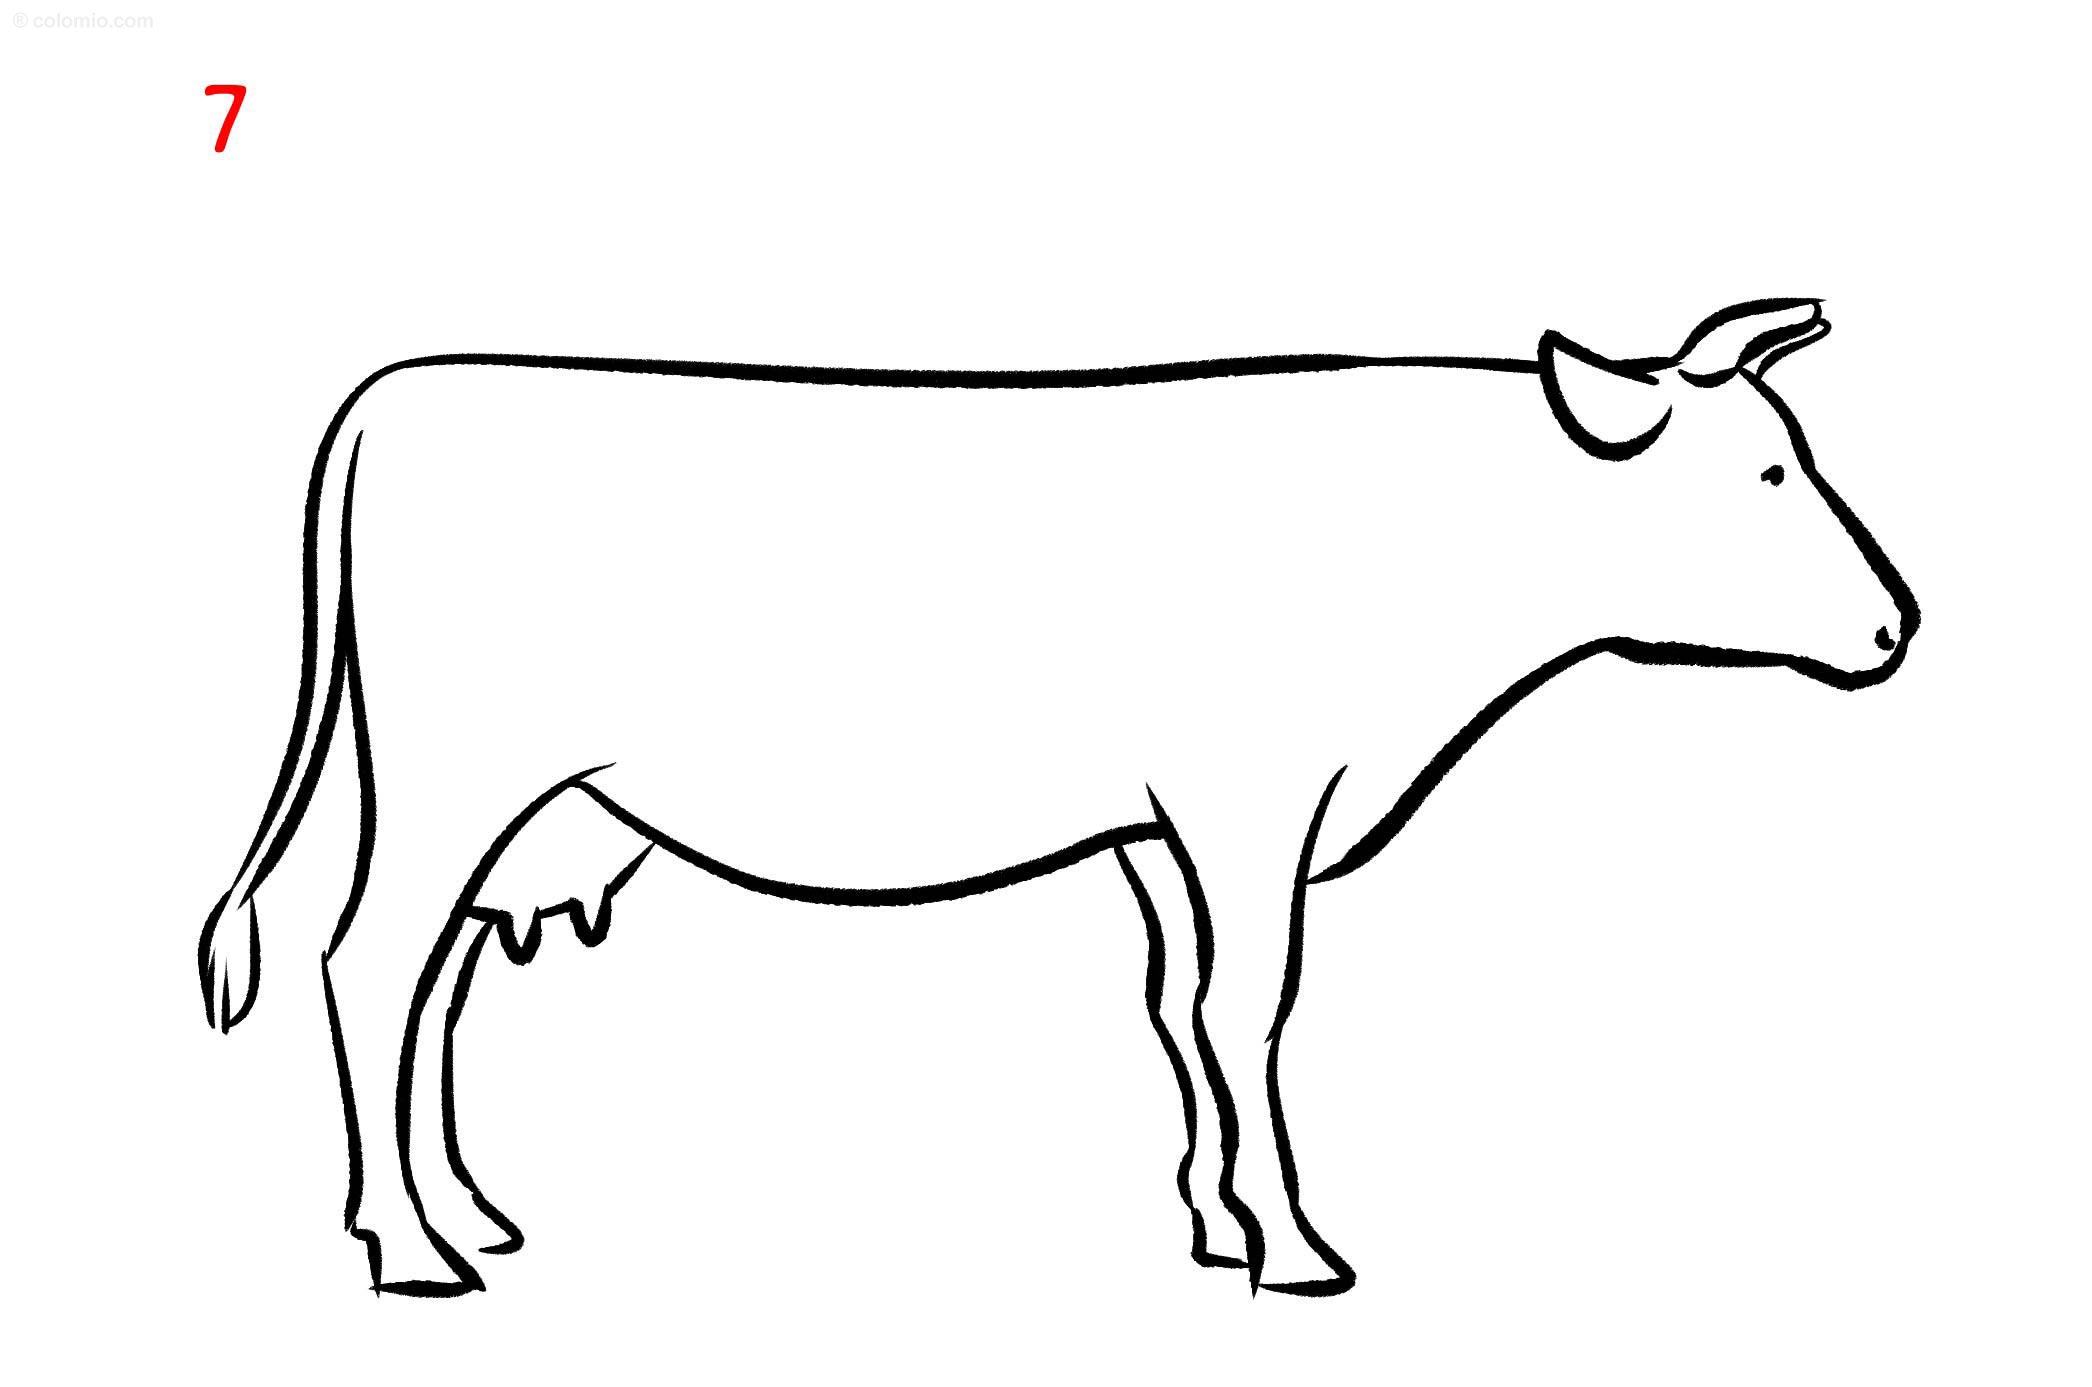 Cows coloring pages free printable cow coloring sheets